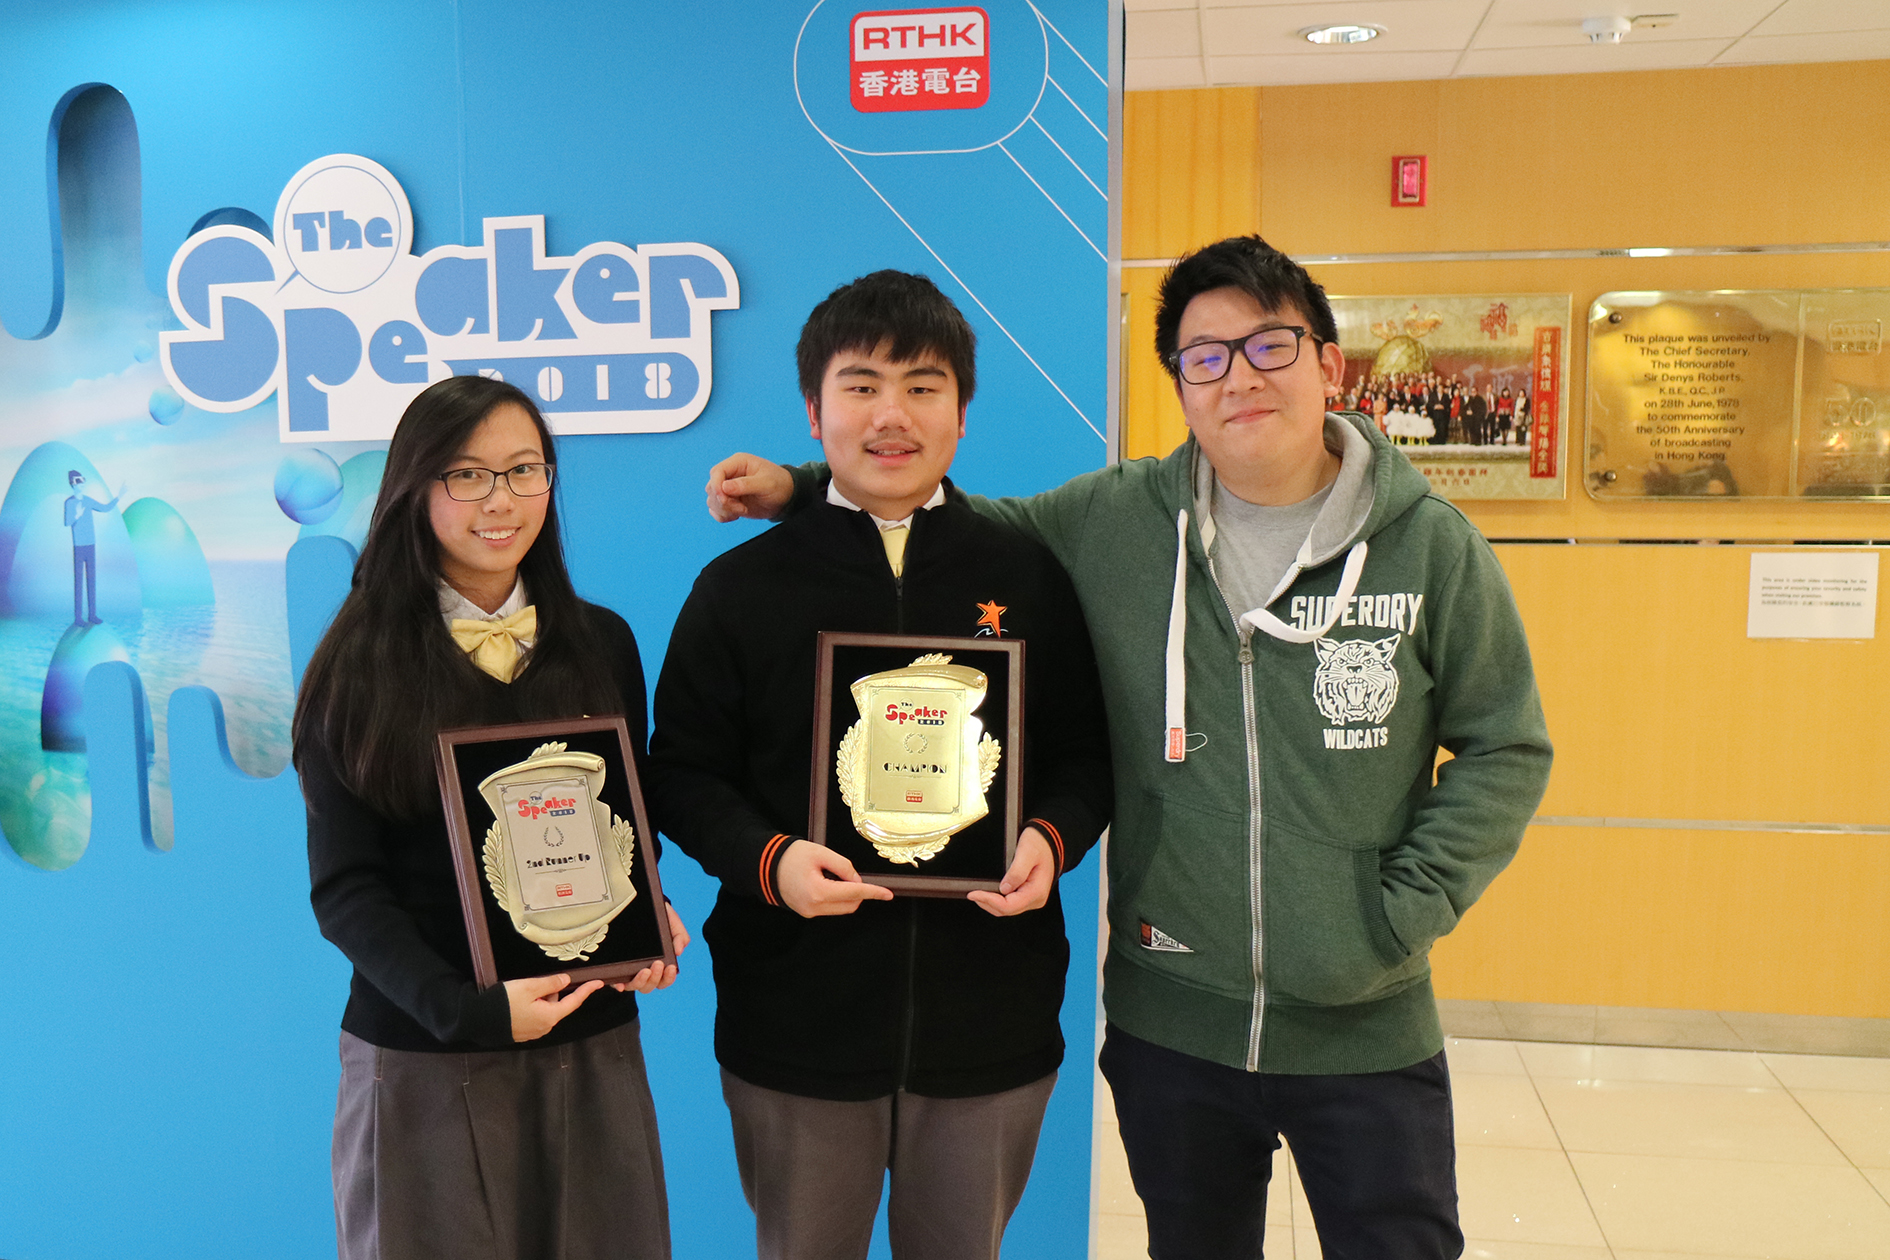 From left: Miss Amber Mak, Mr. Michael Young and Mr. Benjamin Ching